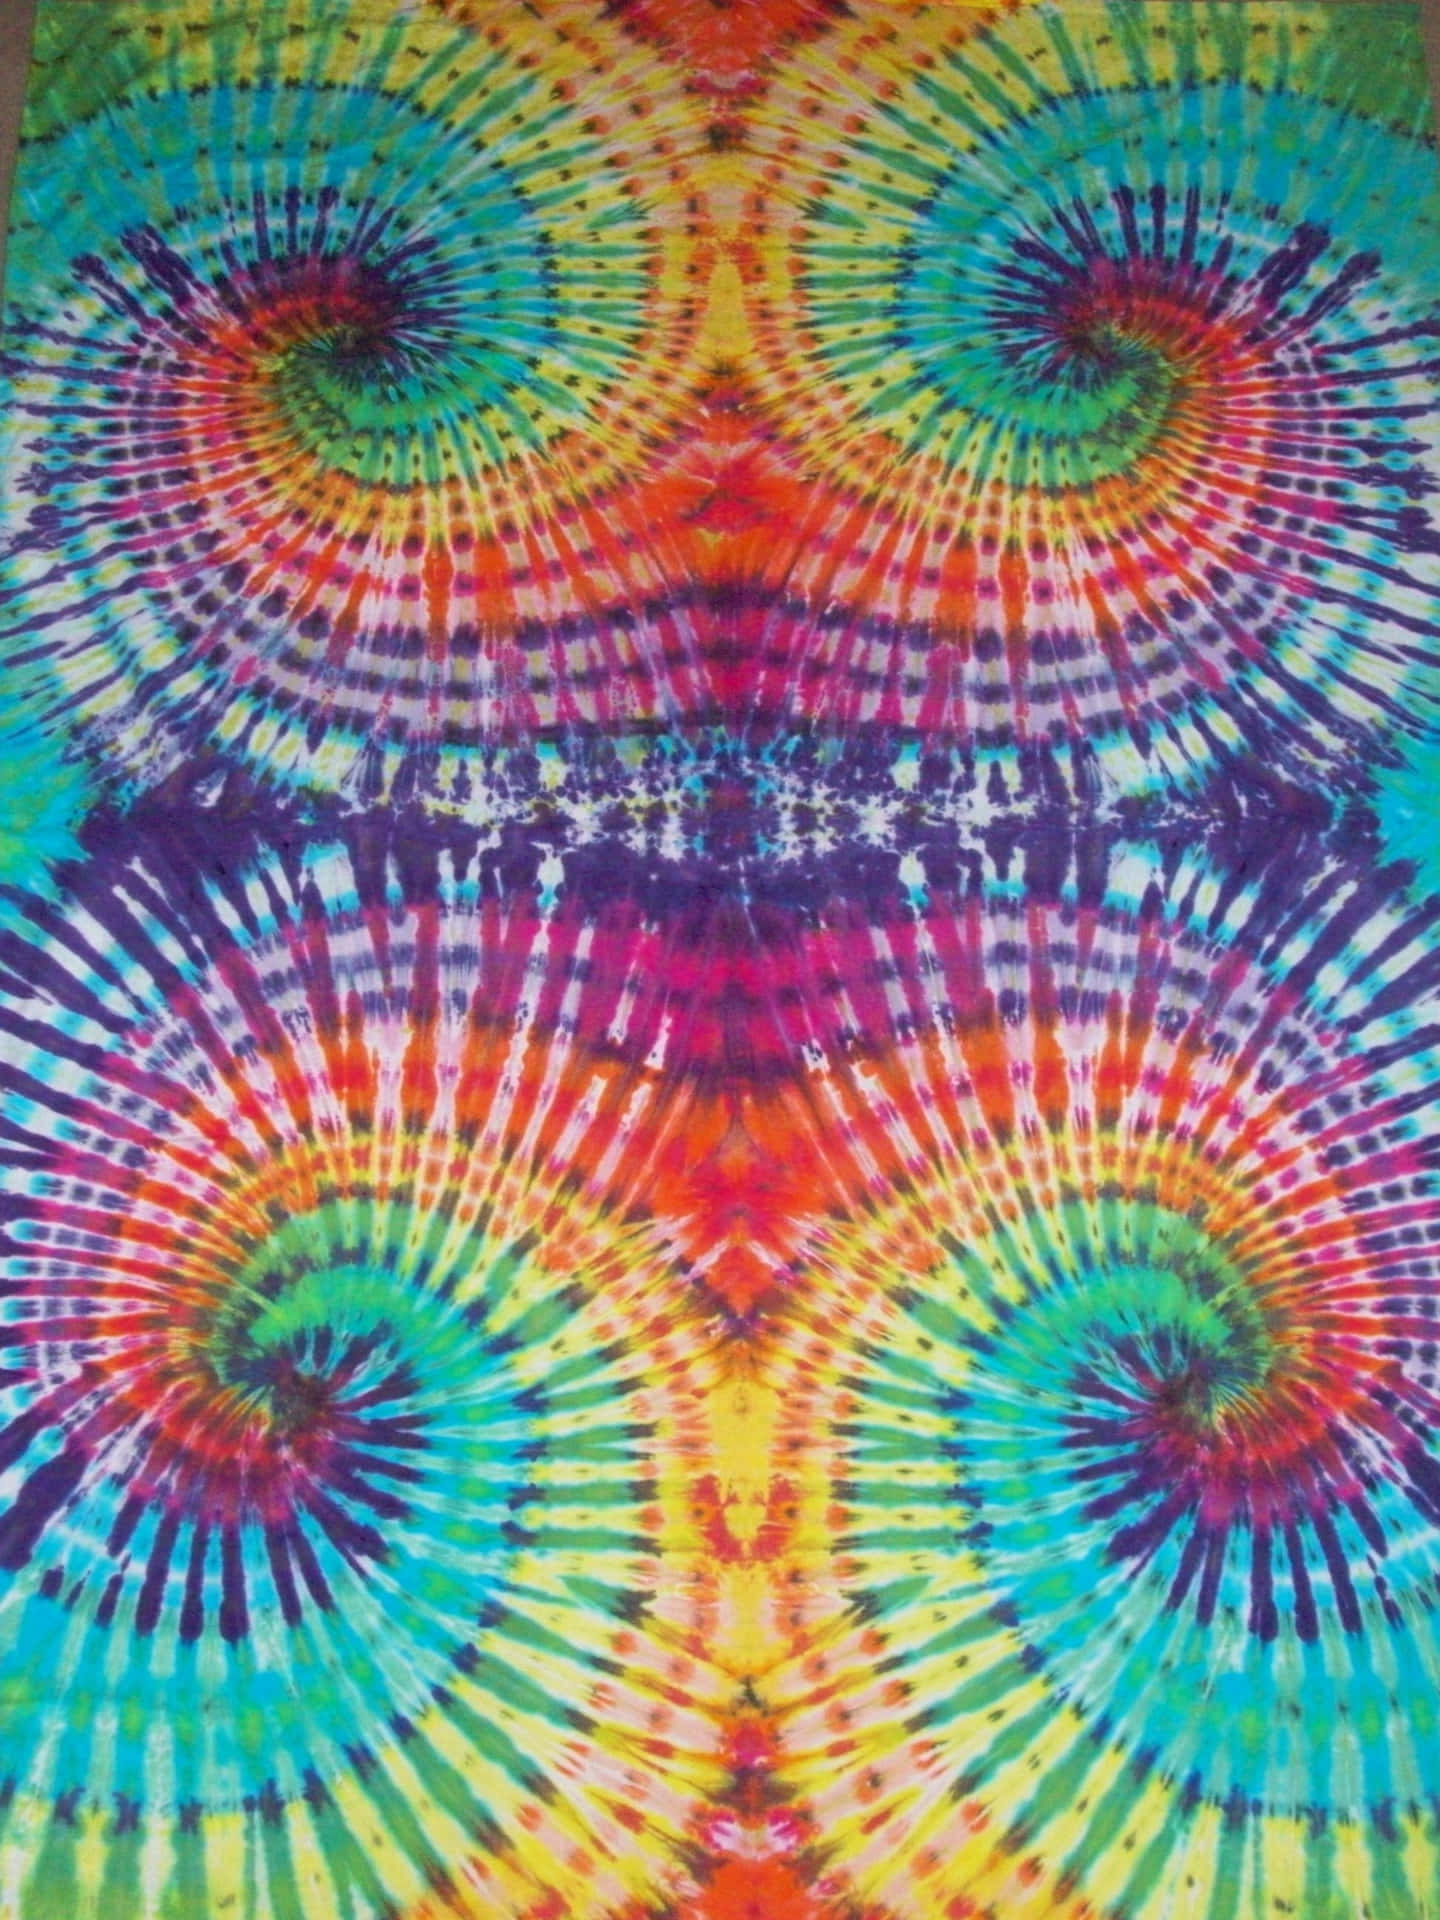 A Colorful Tie Dye Blanket With A Spiral Design